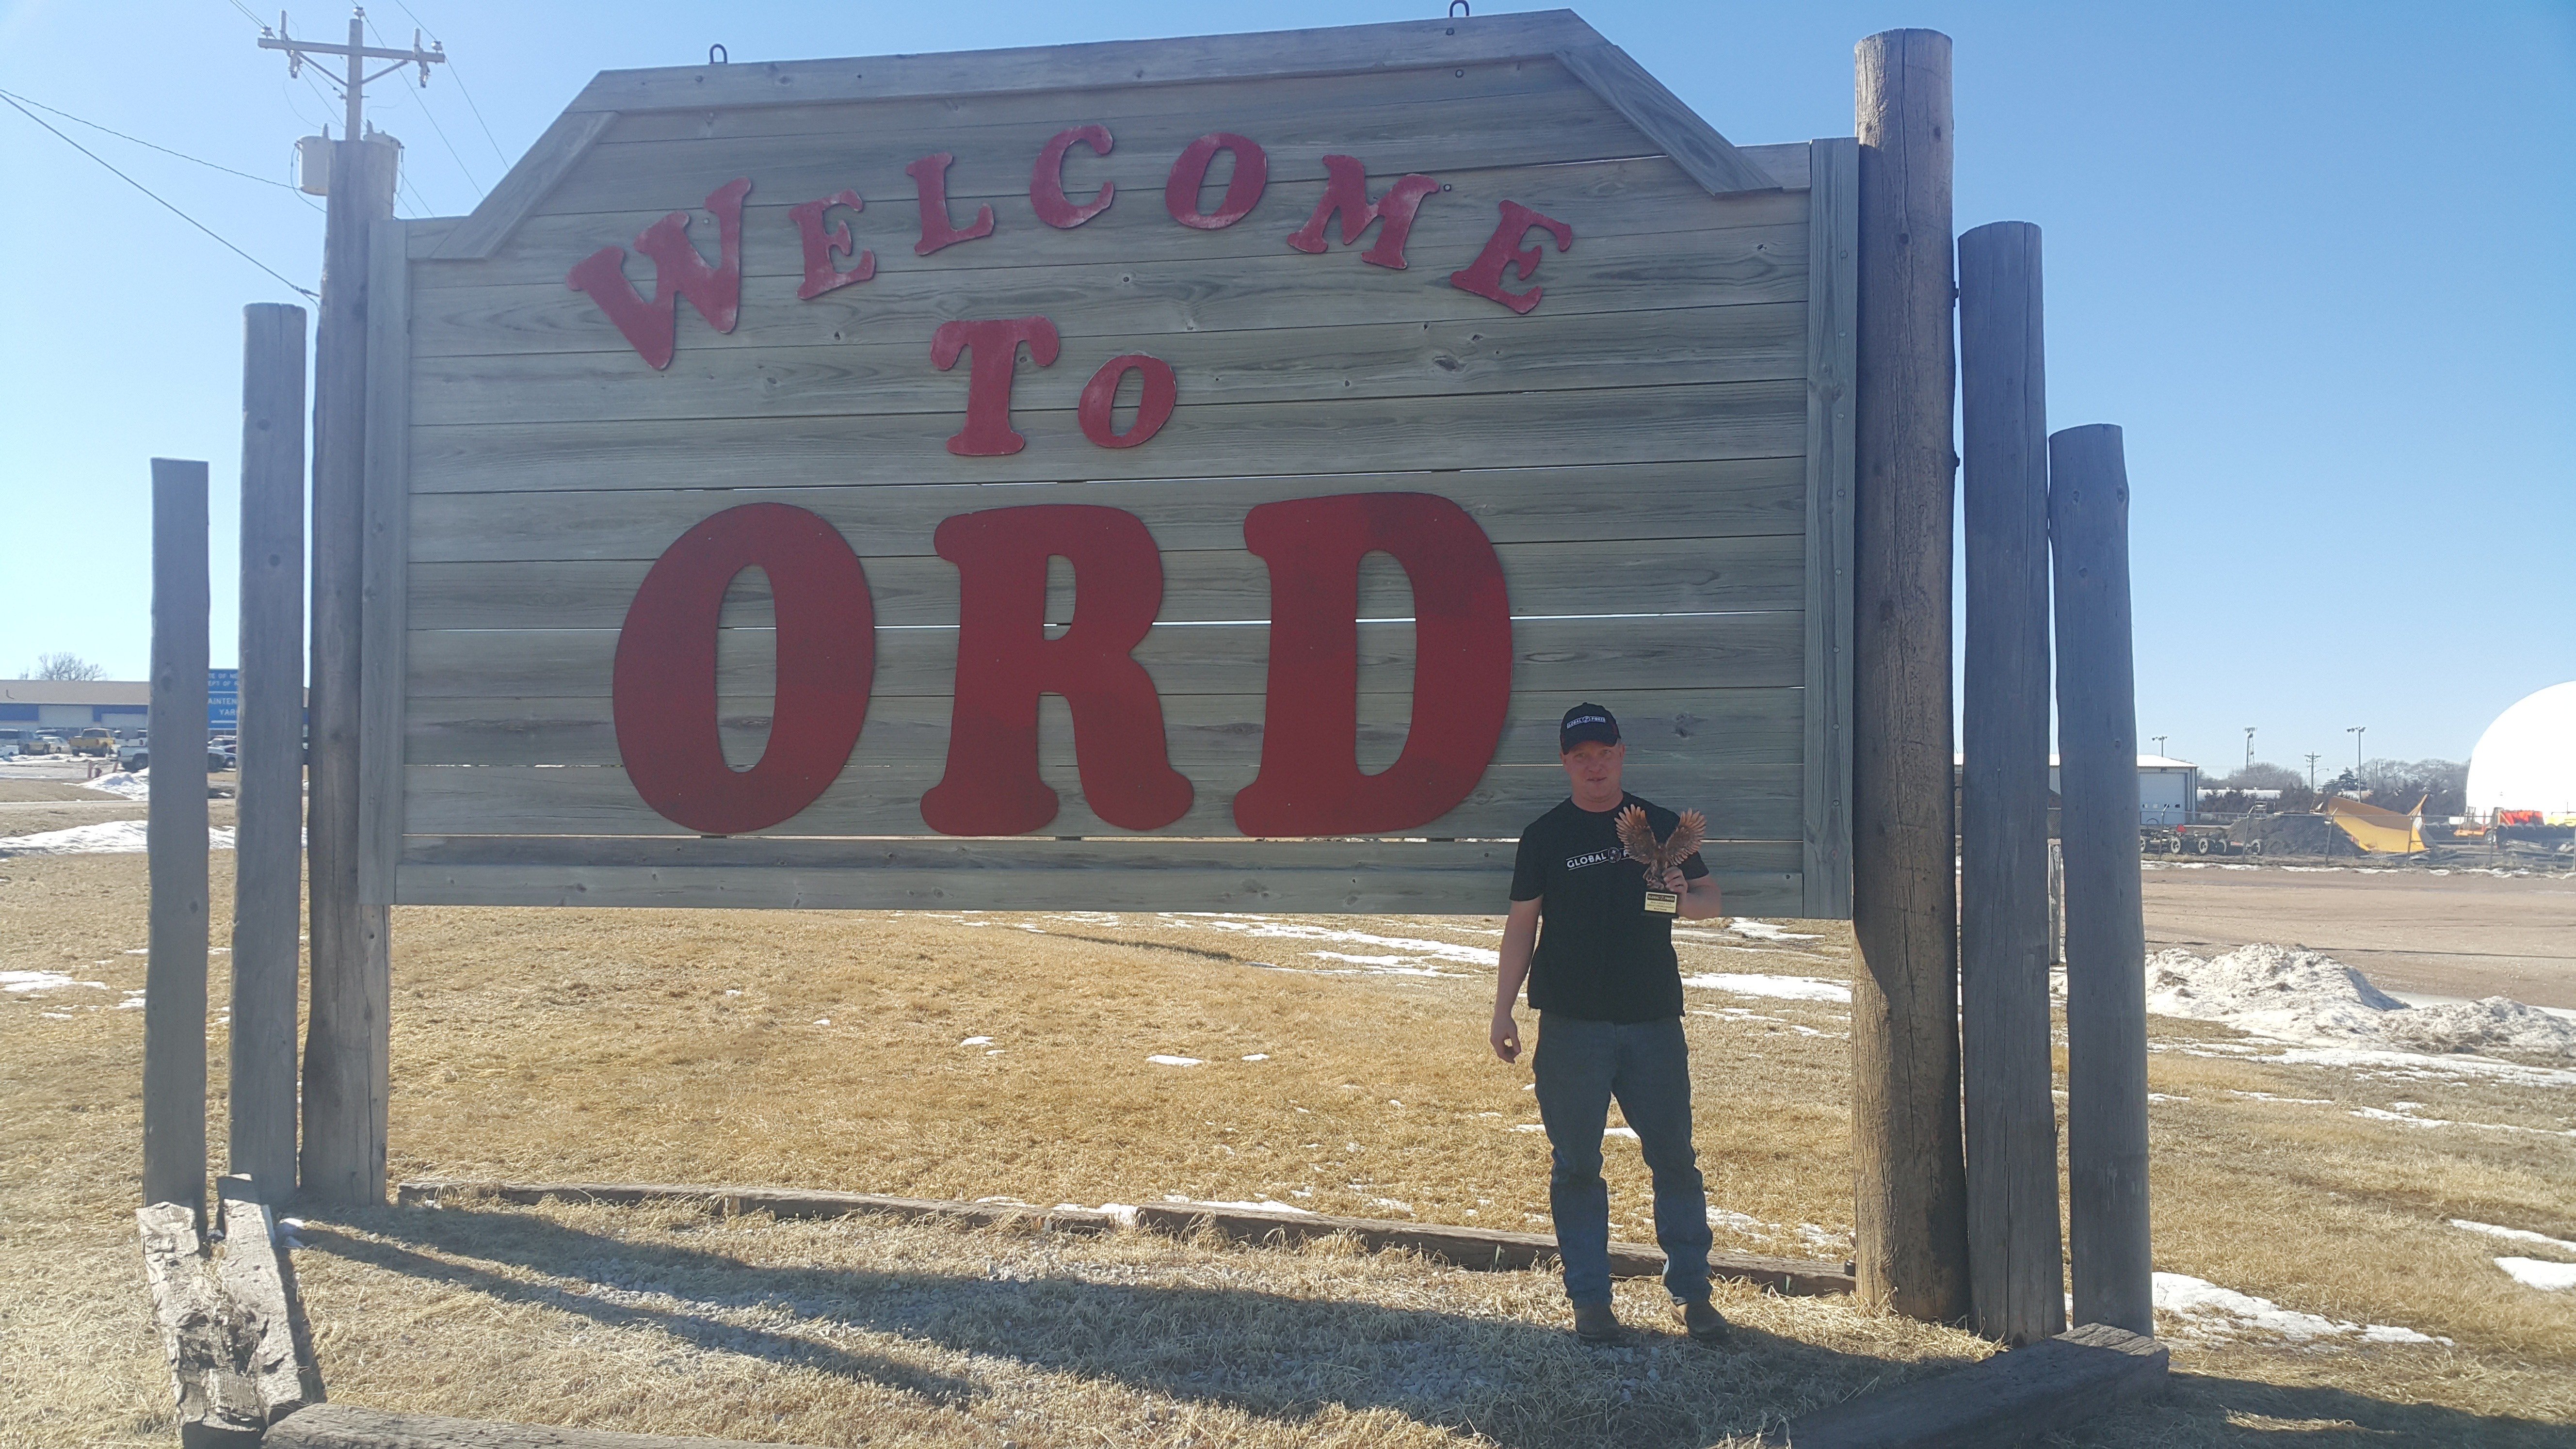 A person standing next to a large wooden sign that reads ‘WELCOME TO ORD’ in bold red letters against the wood’s natural color, with a clear blue sky in the background